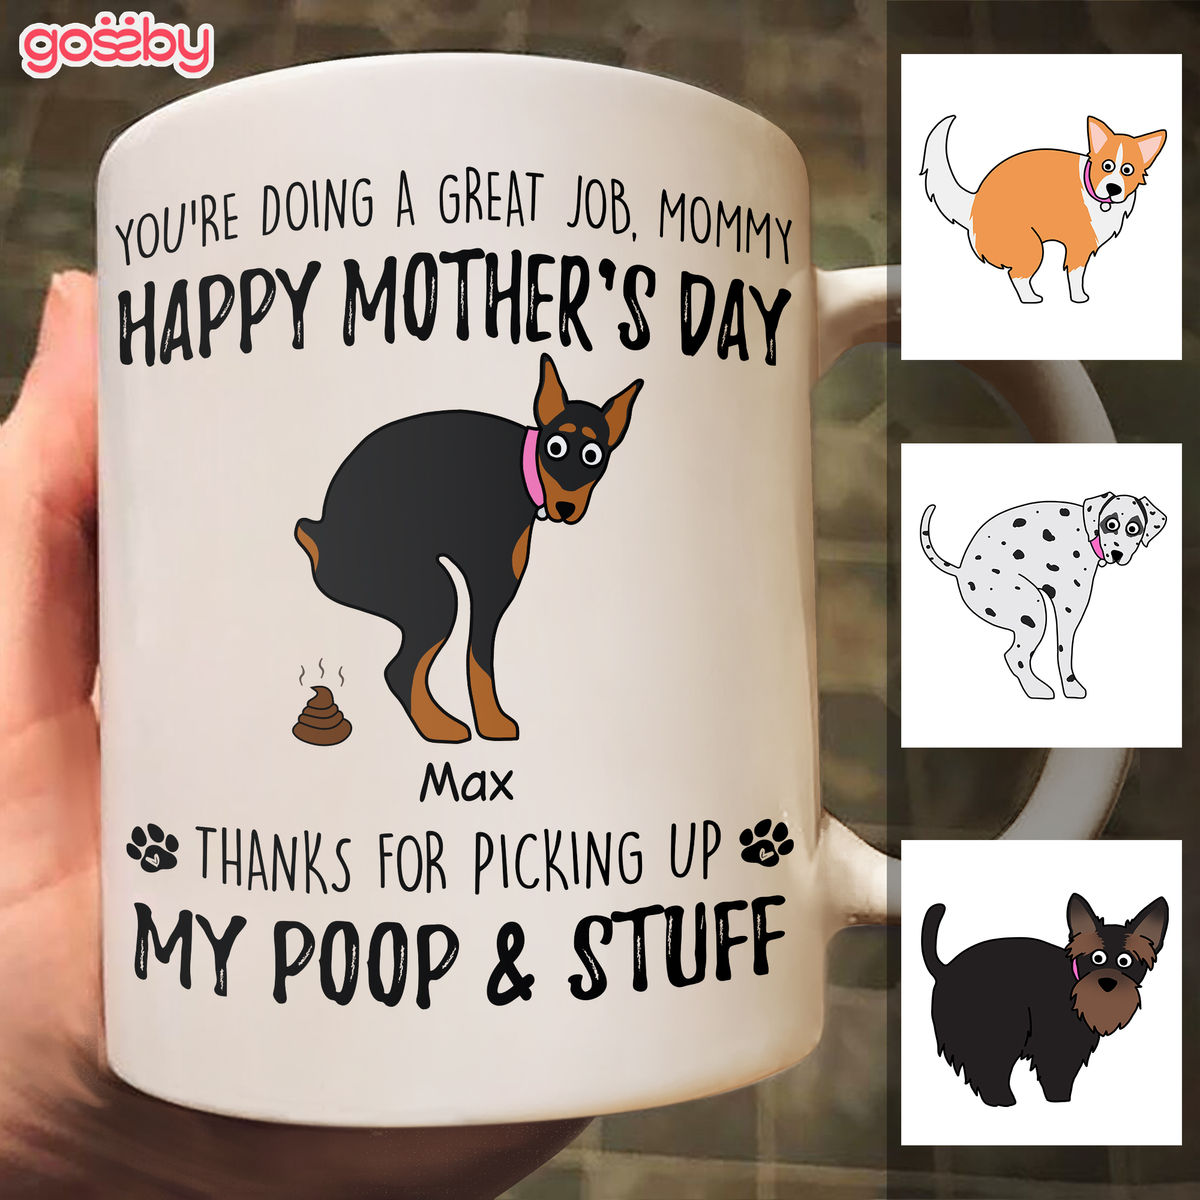 Custom Mug - Dog Lovers - You're Doing A Great Job Mommy Happy Mother's Day - Thanks For Picking Up My Poop & Stuff (43051) - Personalized Mug